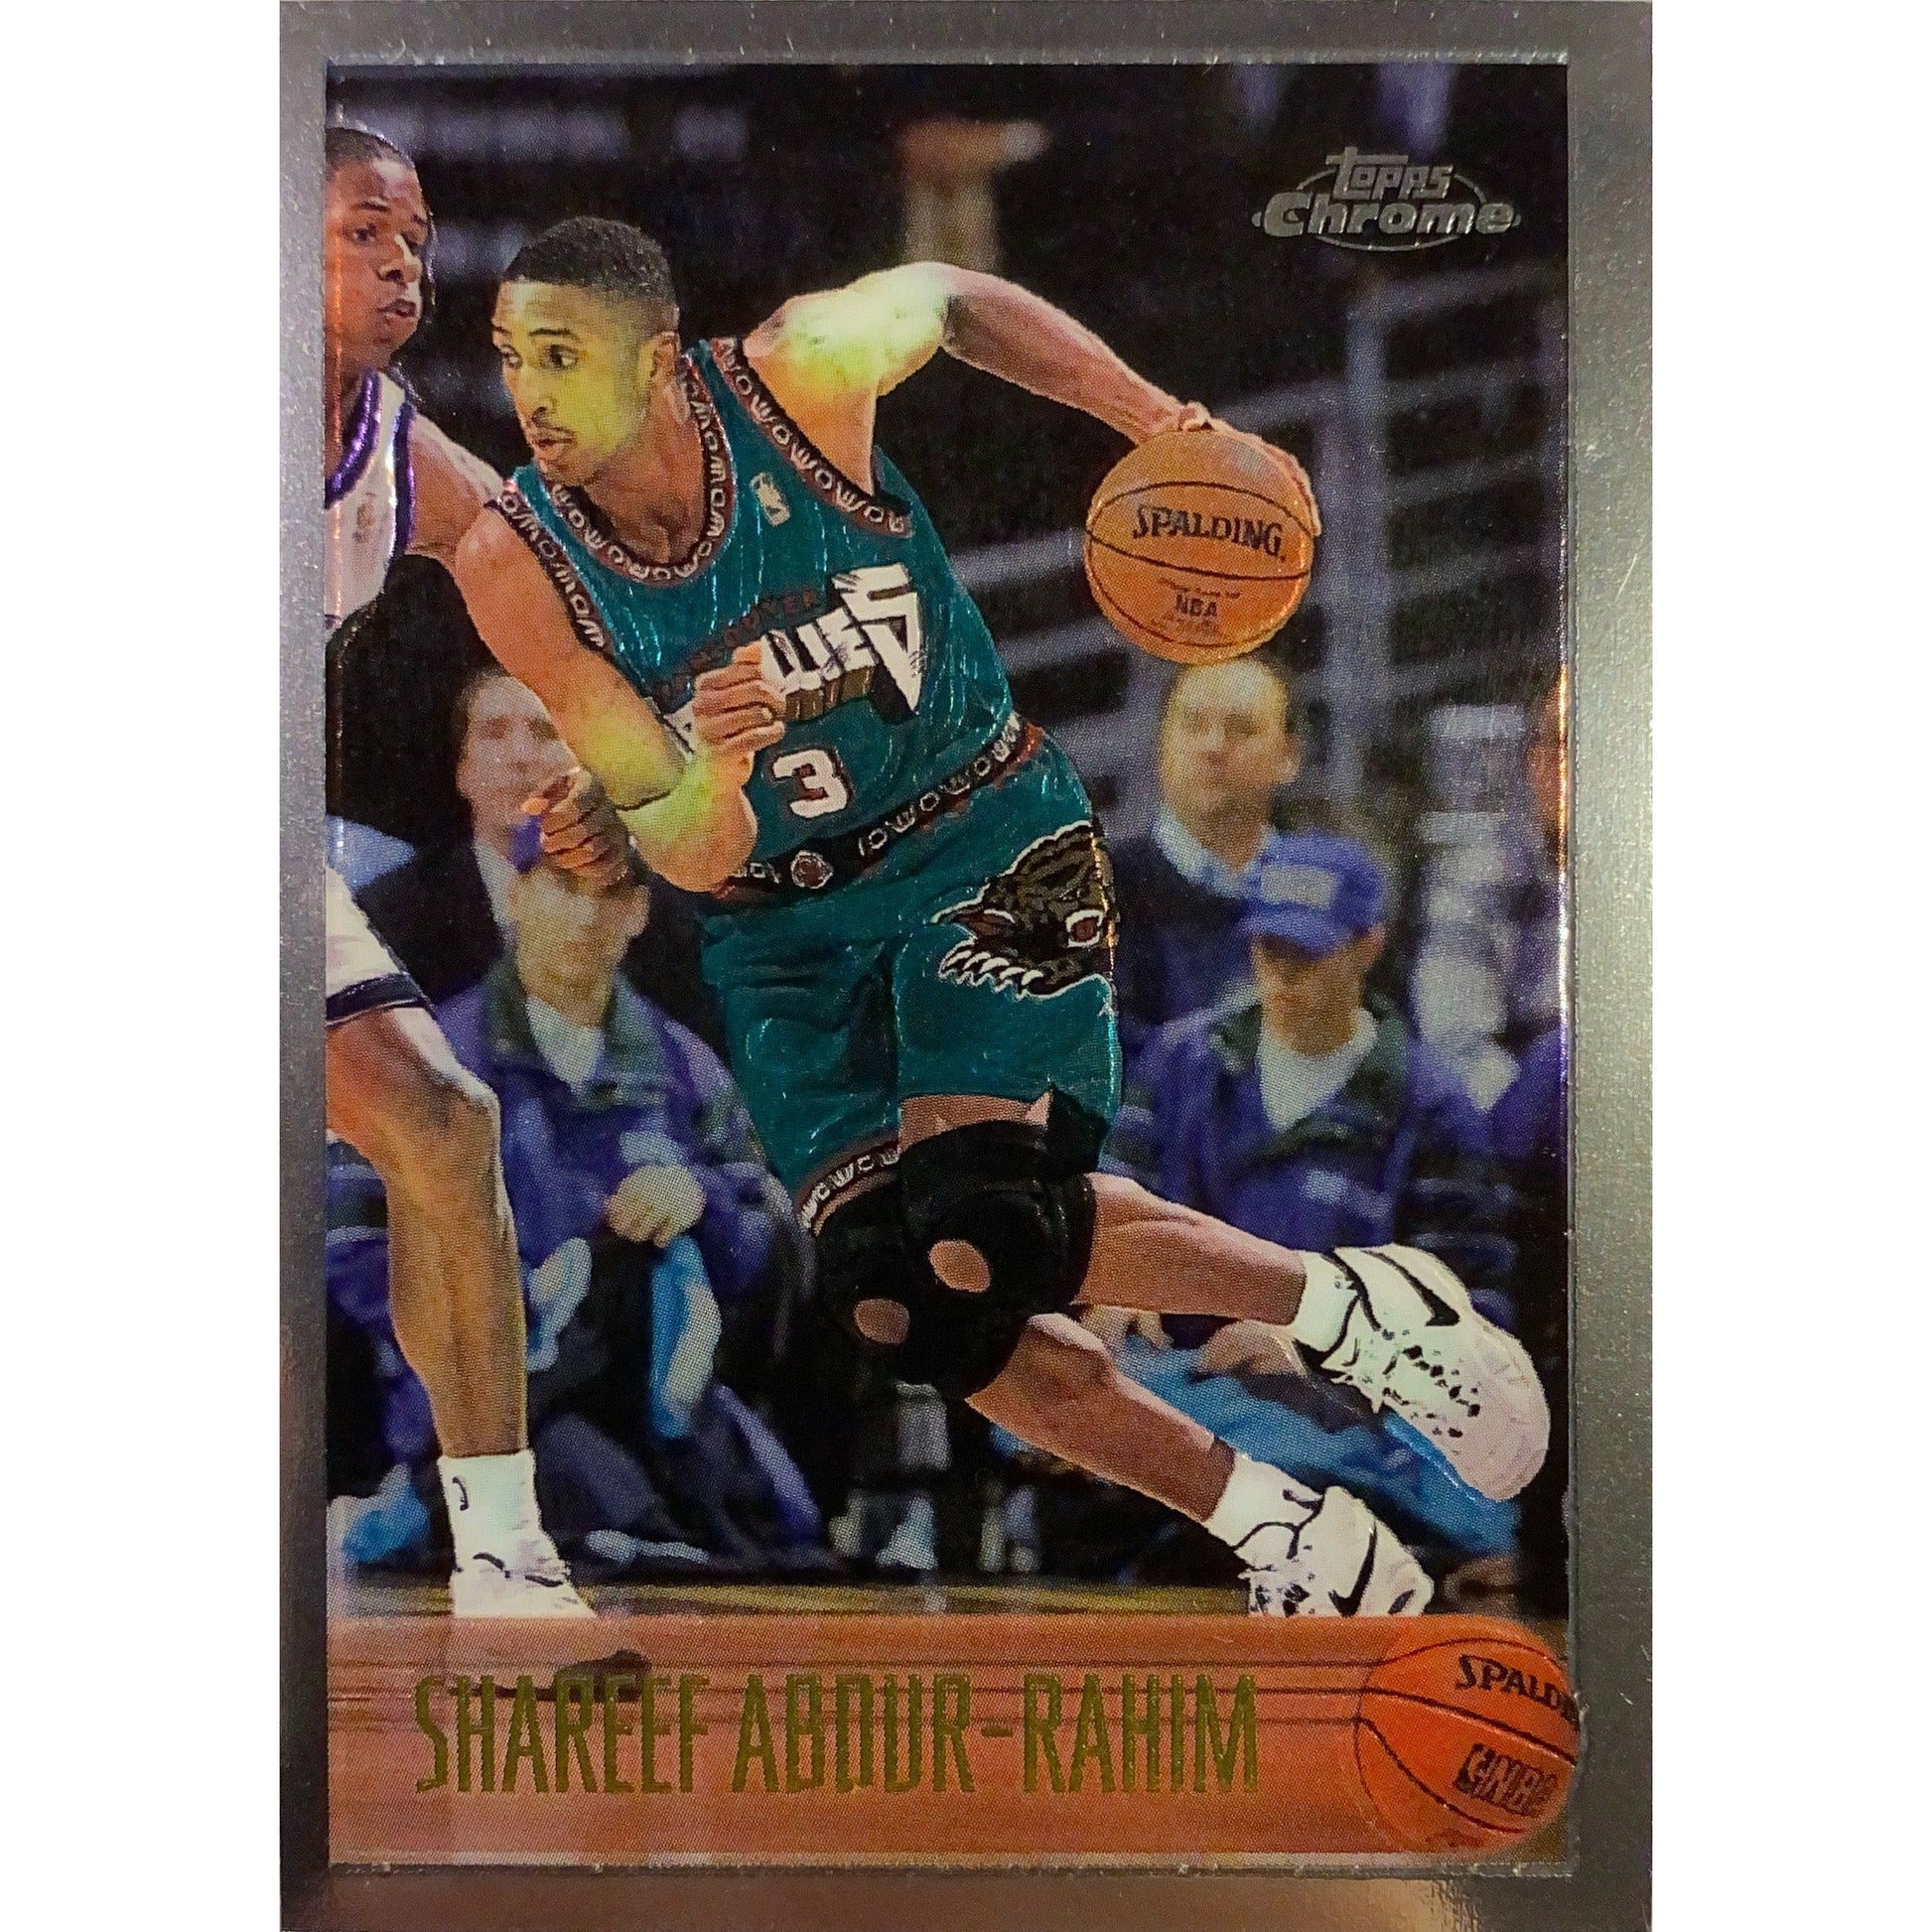  1996-97 Topps Chrome Shareef Abdur-Rahim RC  Local Legends Cards & Collectibles